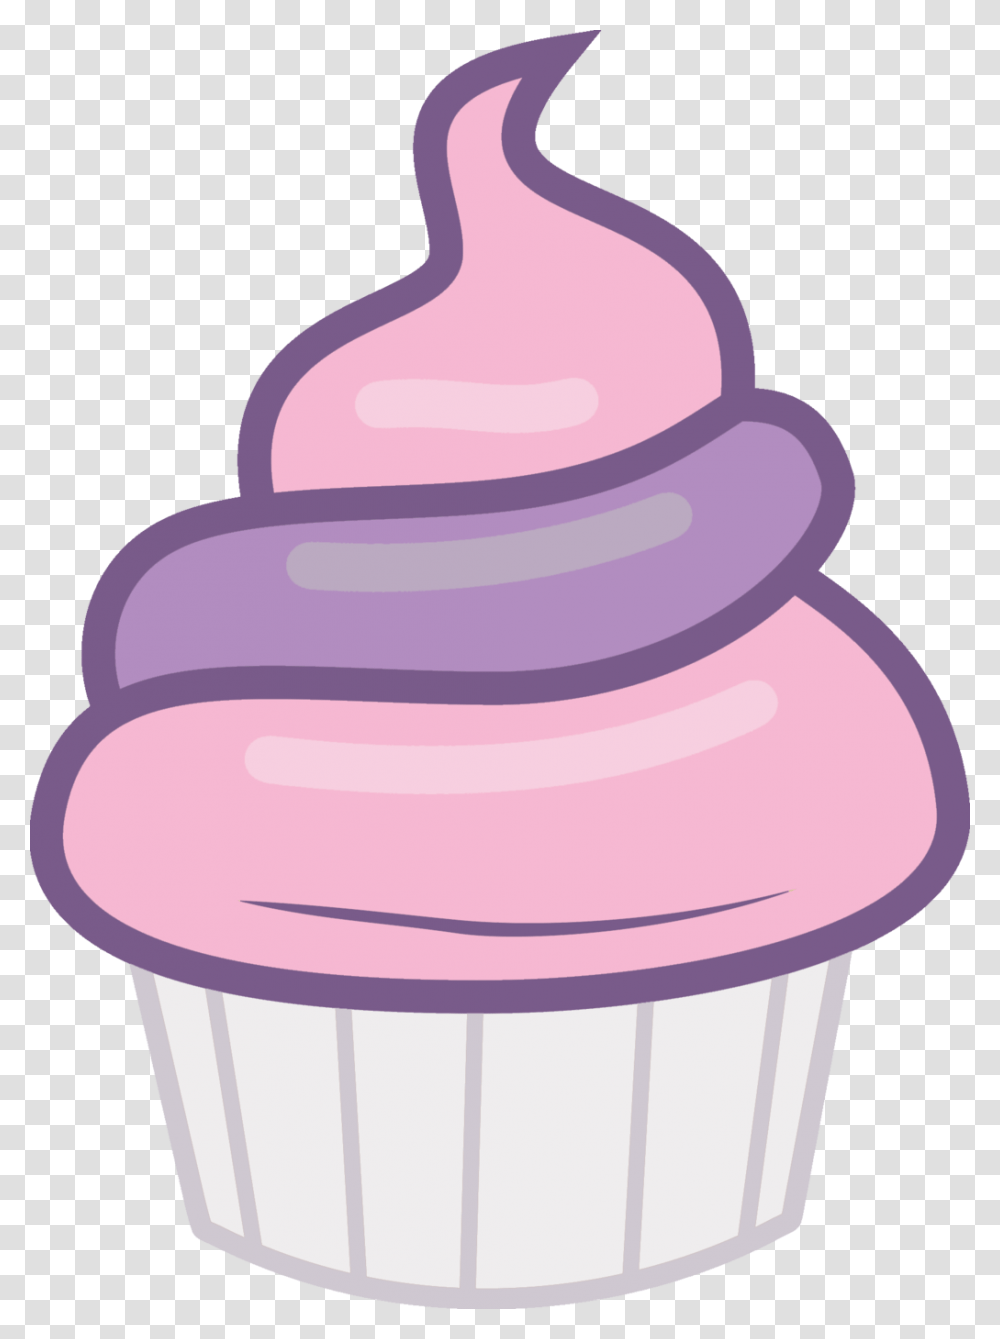 Cupcake Vector Colorful Background Cupcake Clipart, Cream, Dessert, Food, Creme Transparent Png